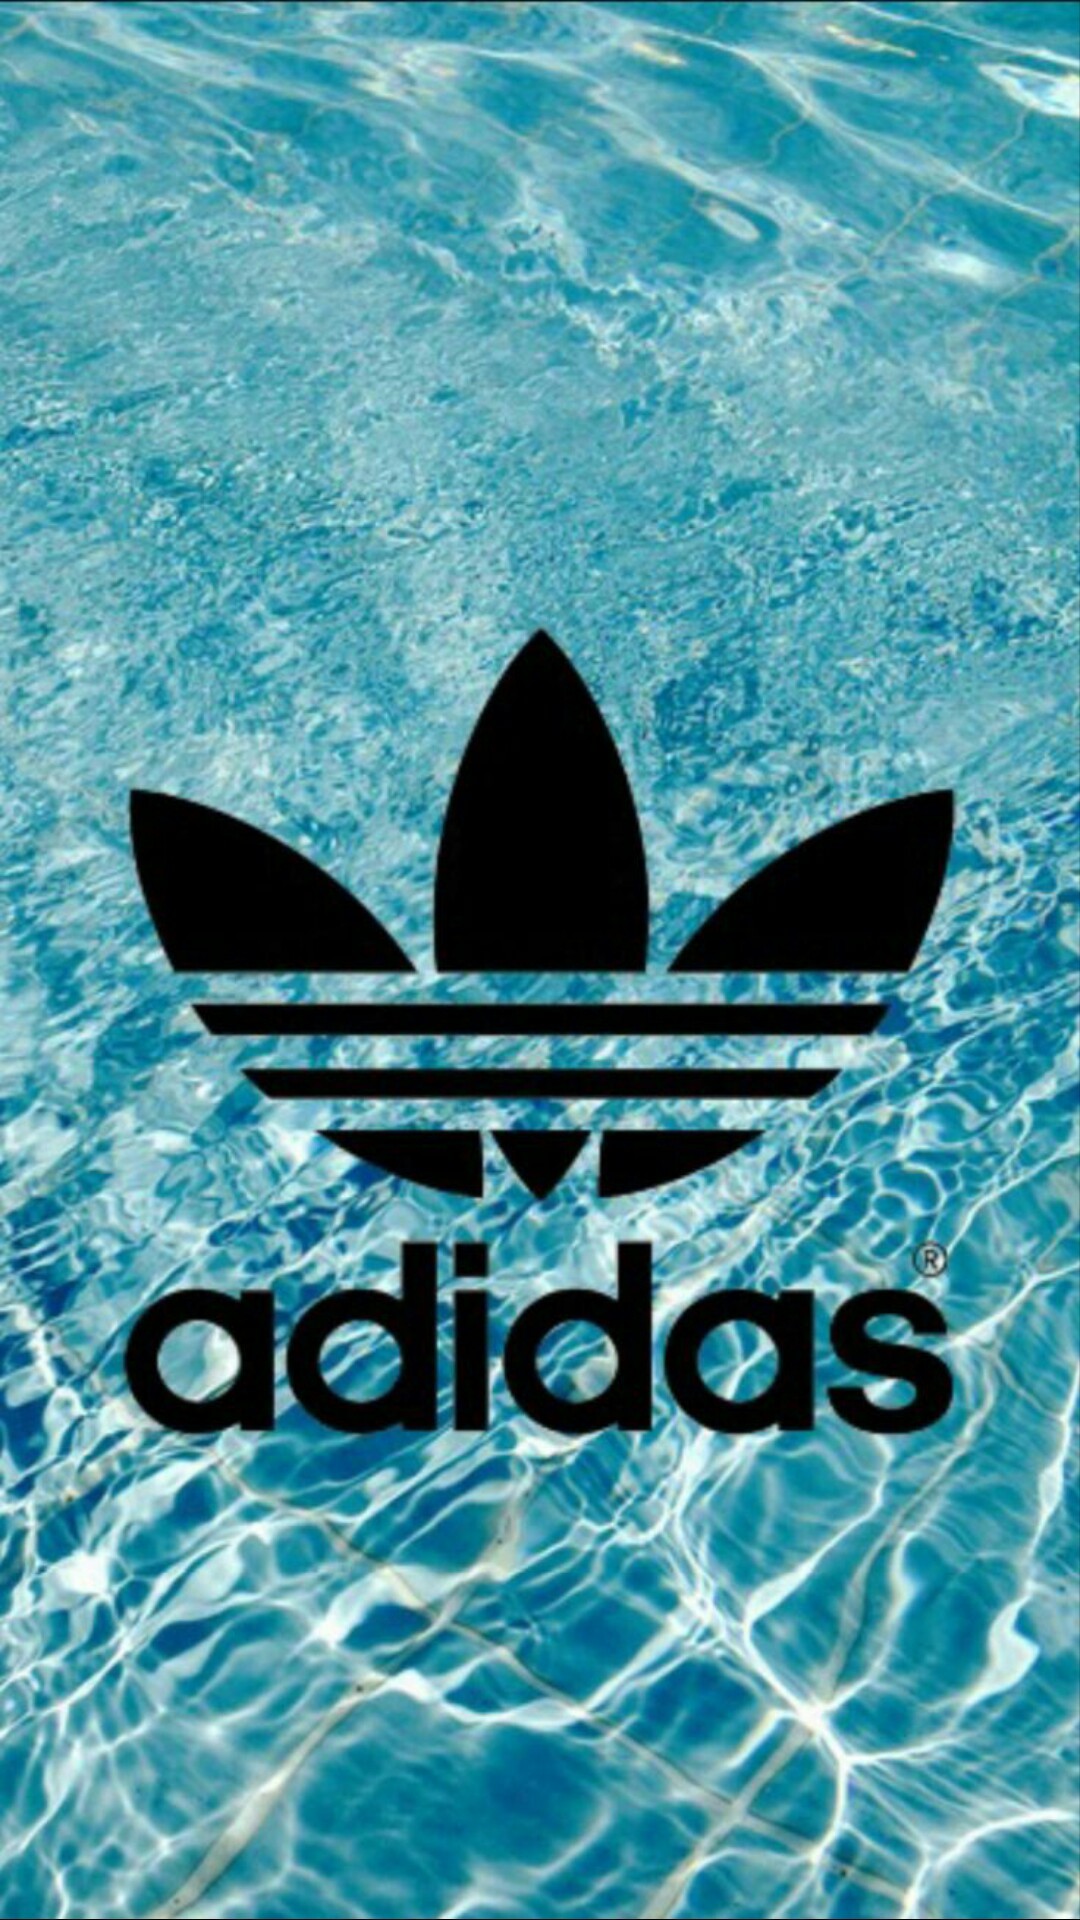 Phone Backgrounds, Iphone Wallpapers, Adidas Sport, Weed, Nike, Paper, Drawings